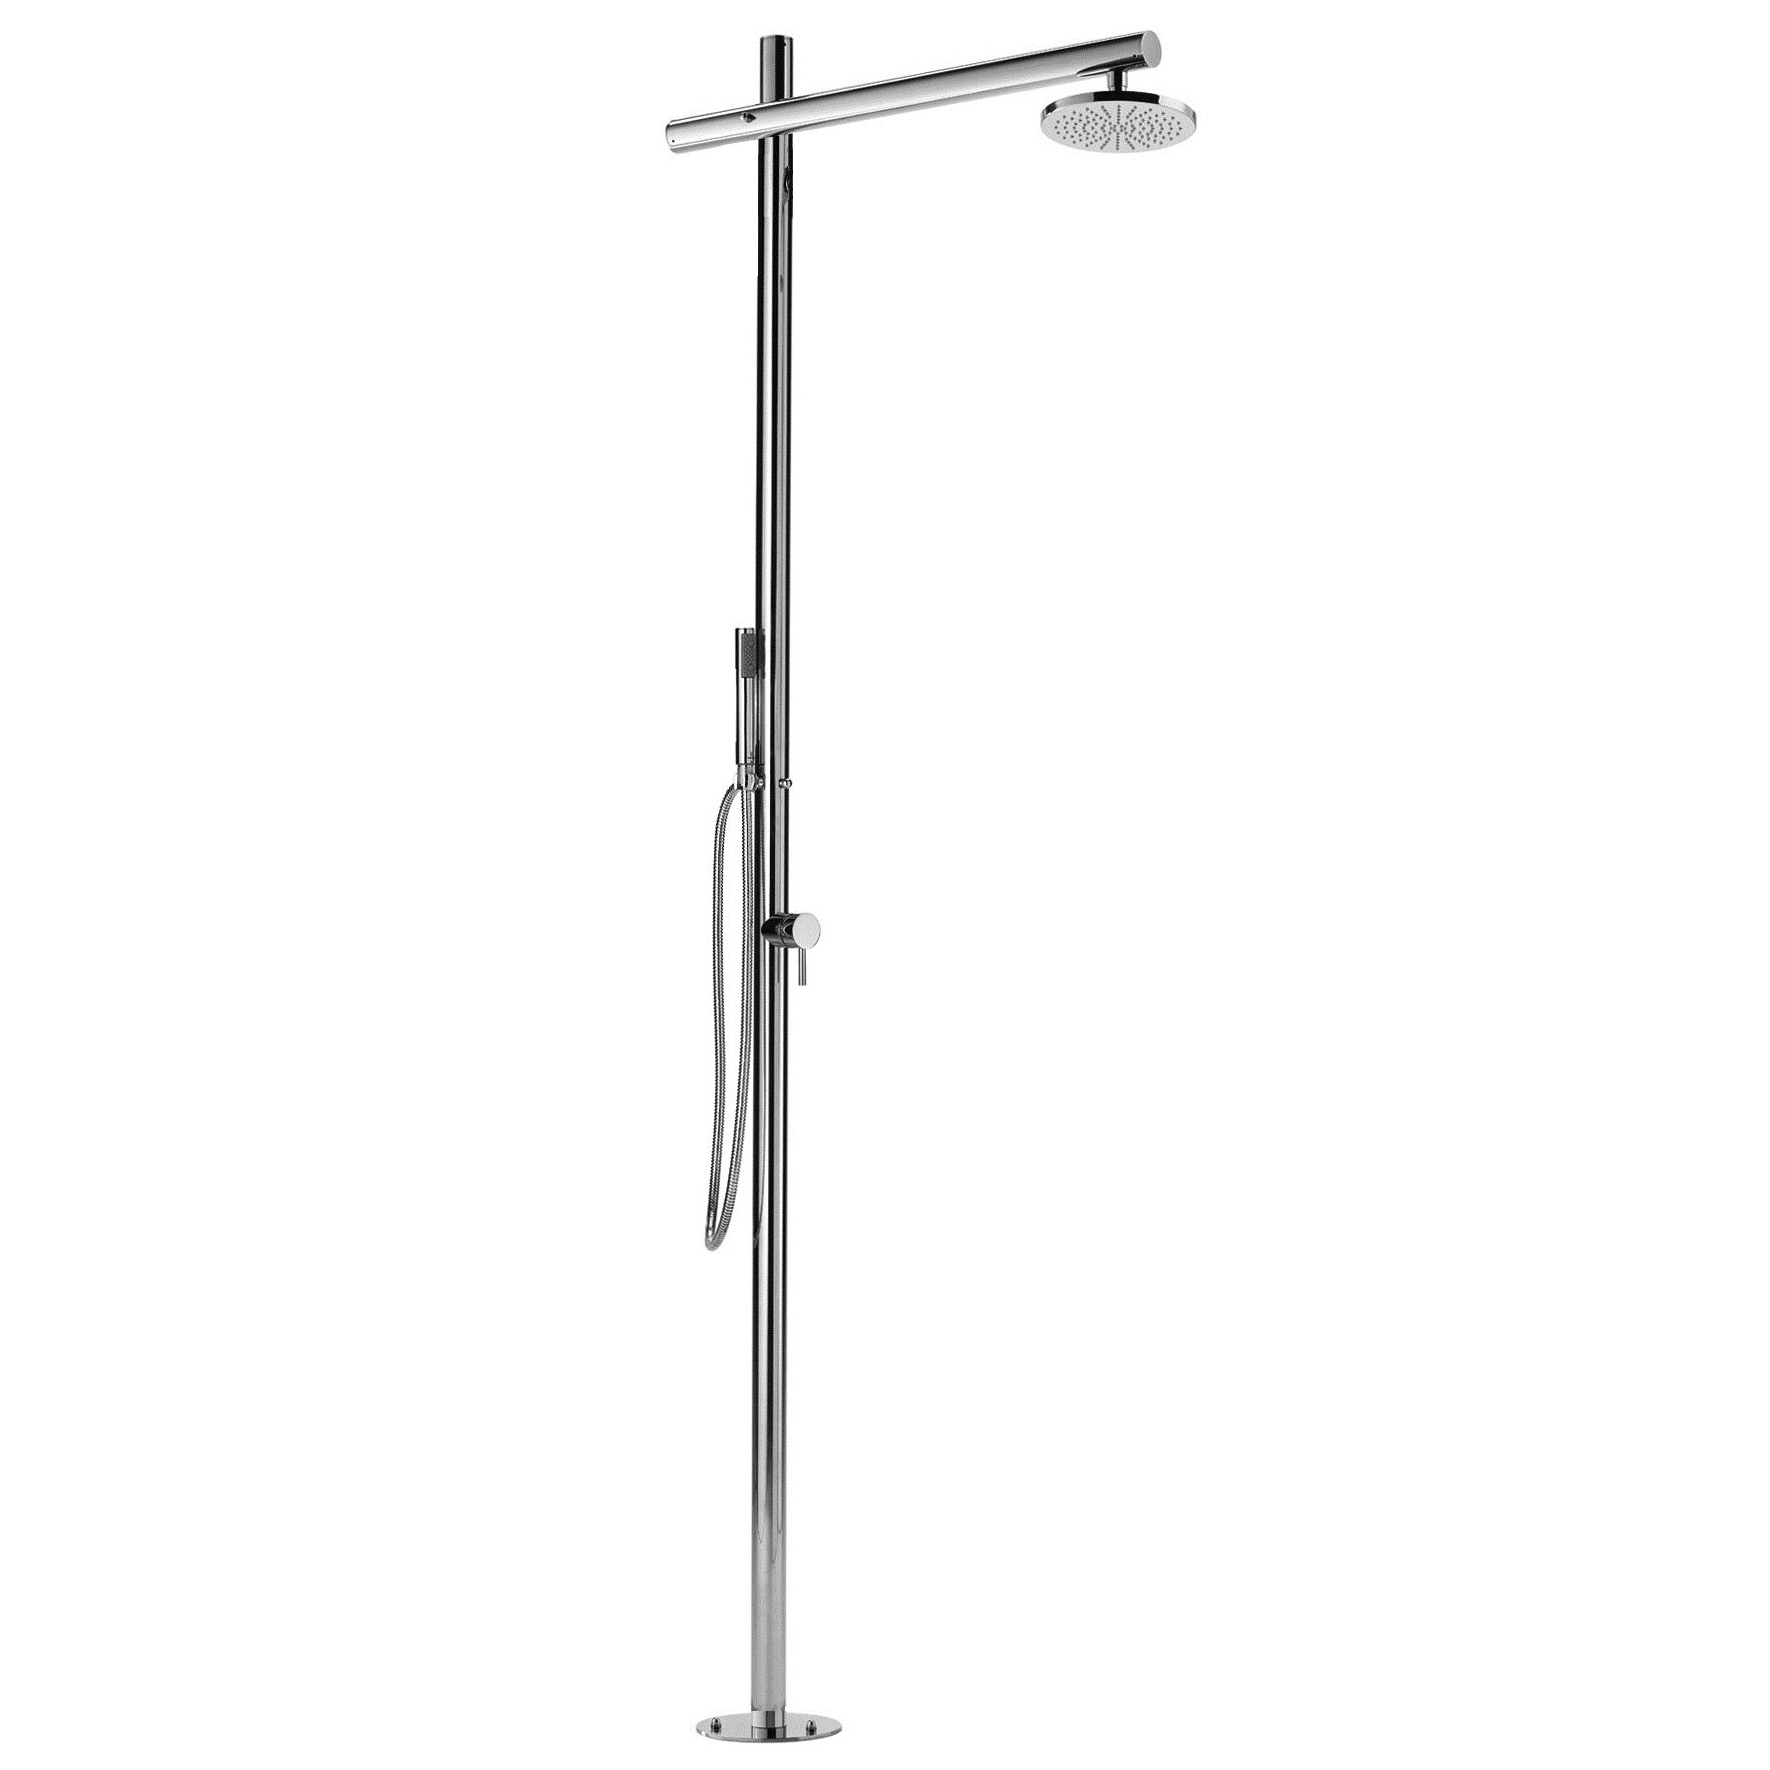 Onda D50 316 Marine Grade Stainless Steel Free Standing Hot and Cold Shower Column with Hand Spray